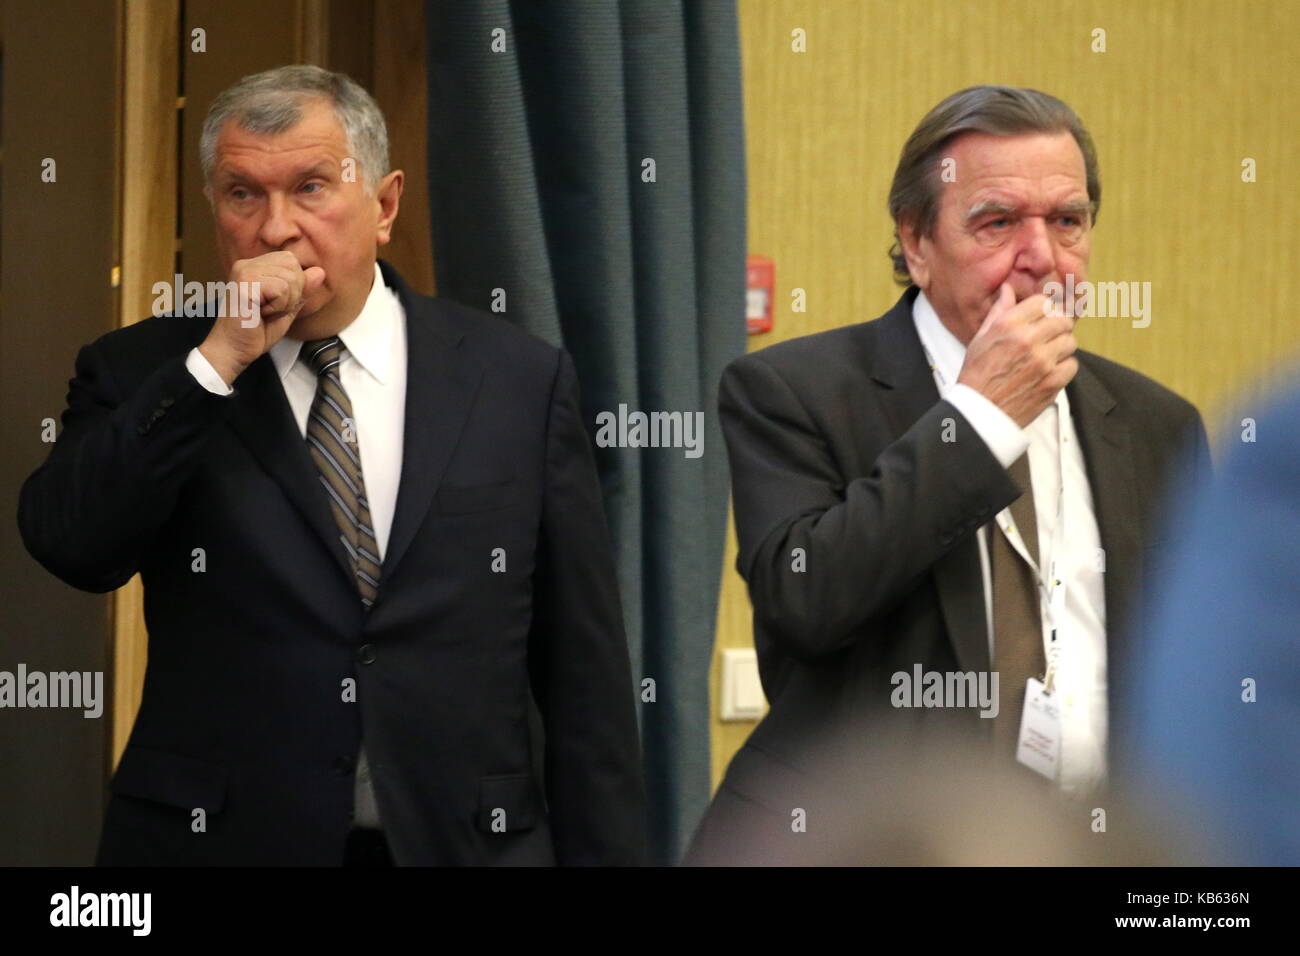 Image result for Gerhard Schroeder and Igor Sechin and Rosneft